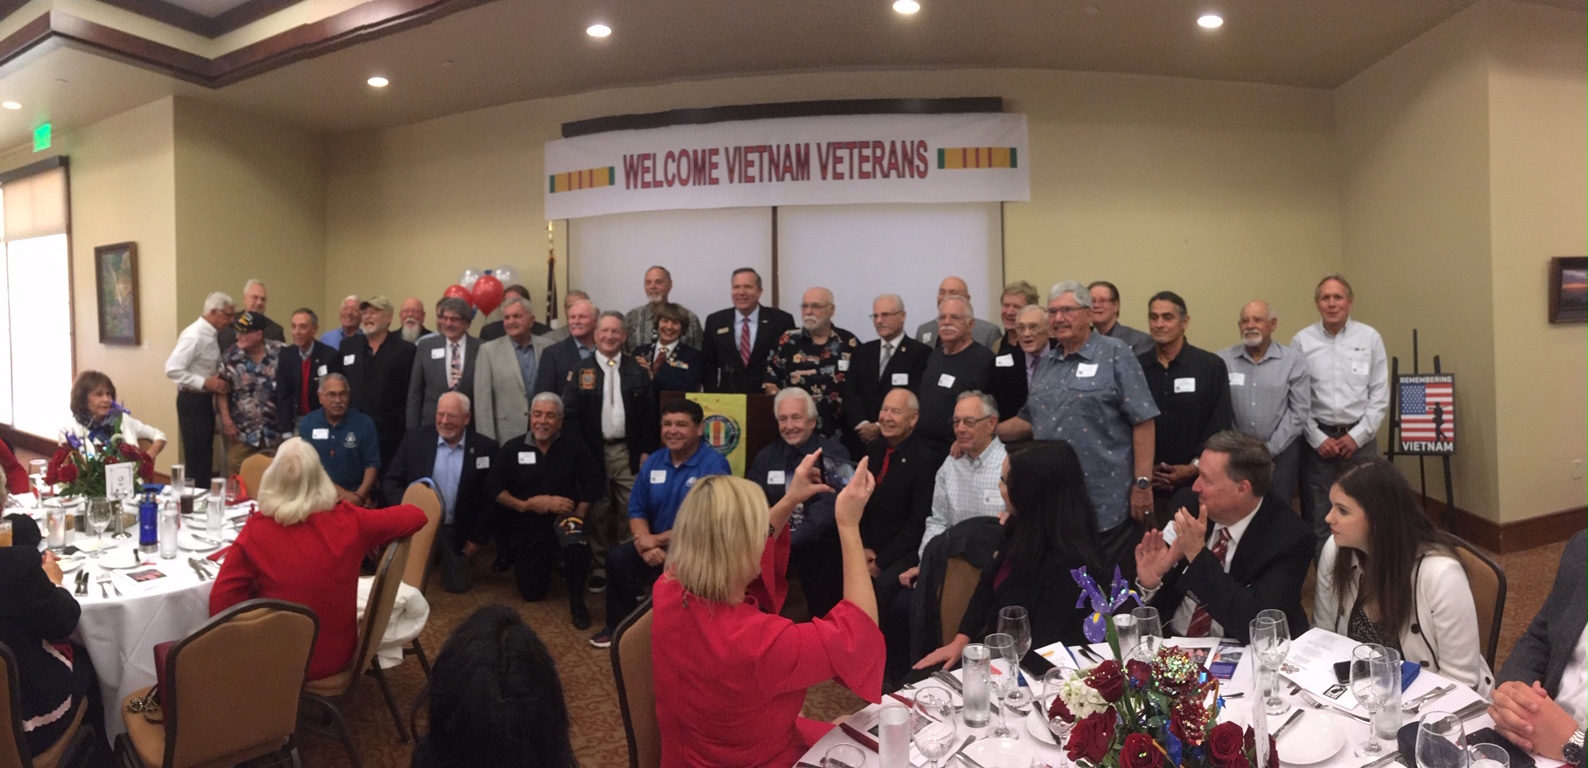 41 Vietnam Veterans were Honored at our May Military Dinner!